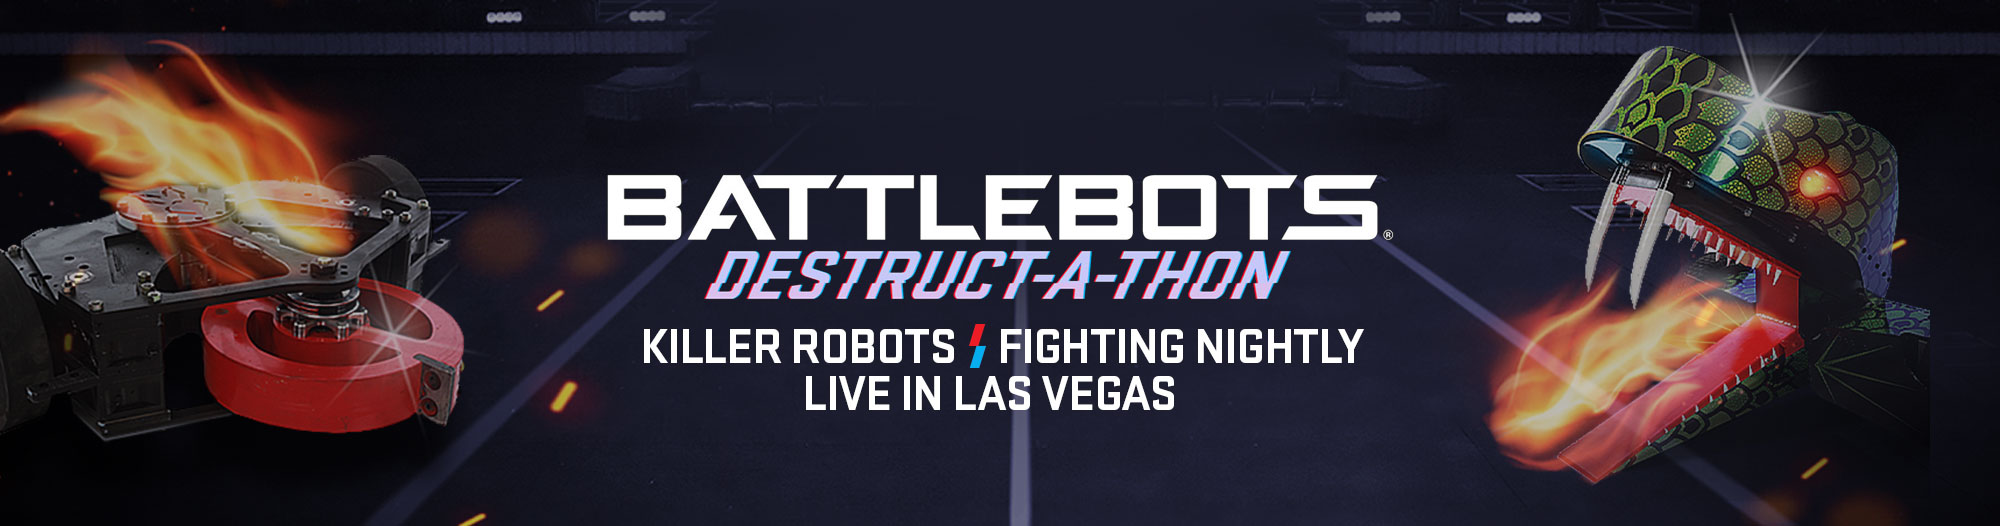 BattleBots Destruct-A-Thon - Killer Robots Fighting Nightly - Live in Las Vegas. The best new family friendly show in Las Vegas